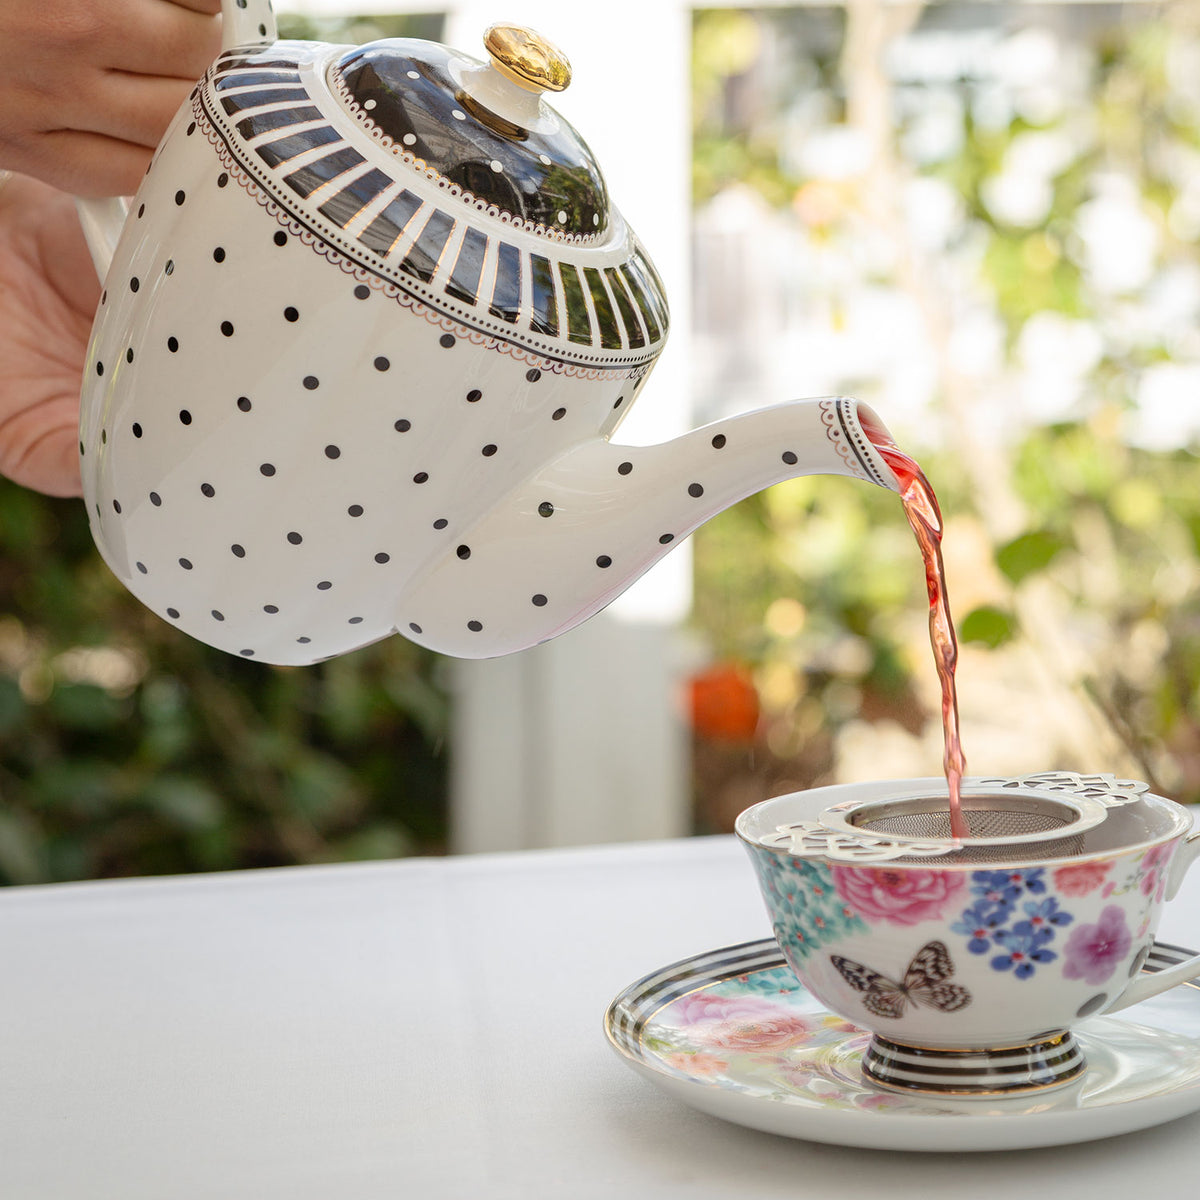 Peach Fruit Tea being poured from a black and white teapot through a empress strainer.